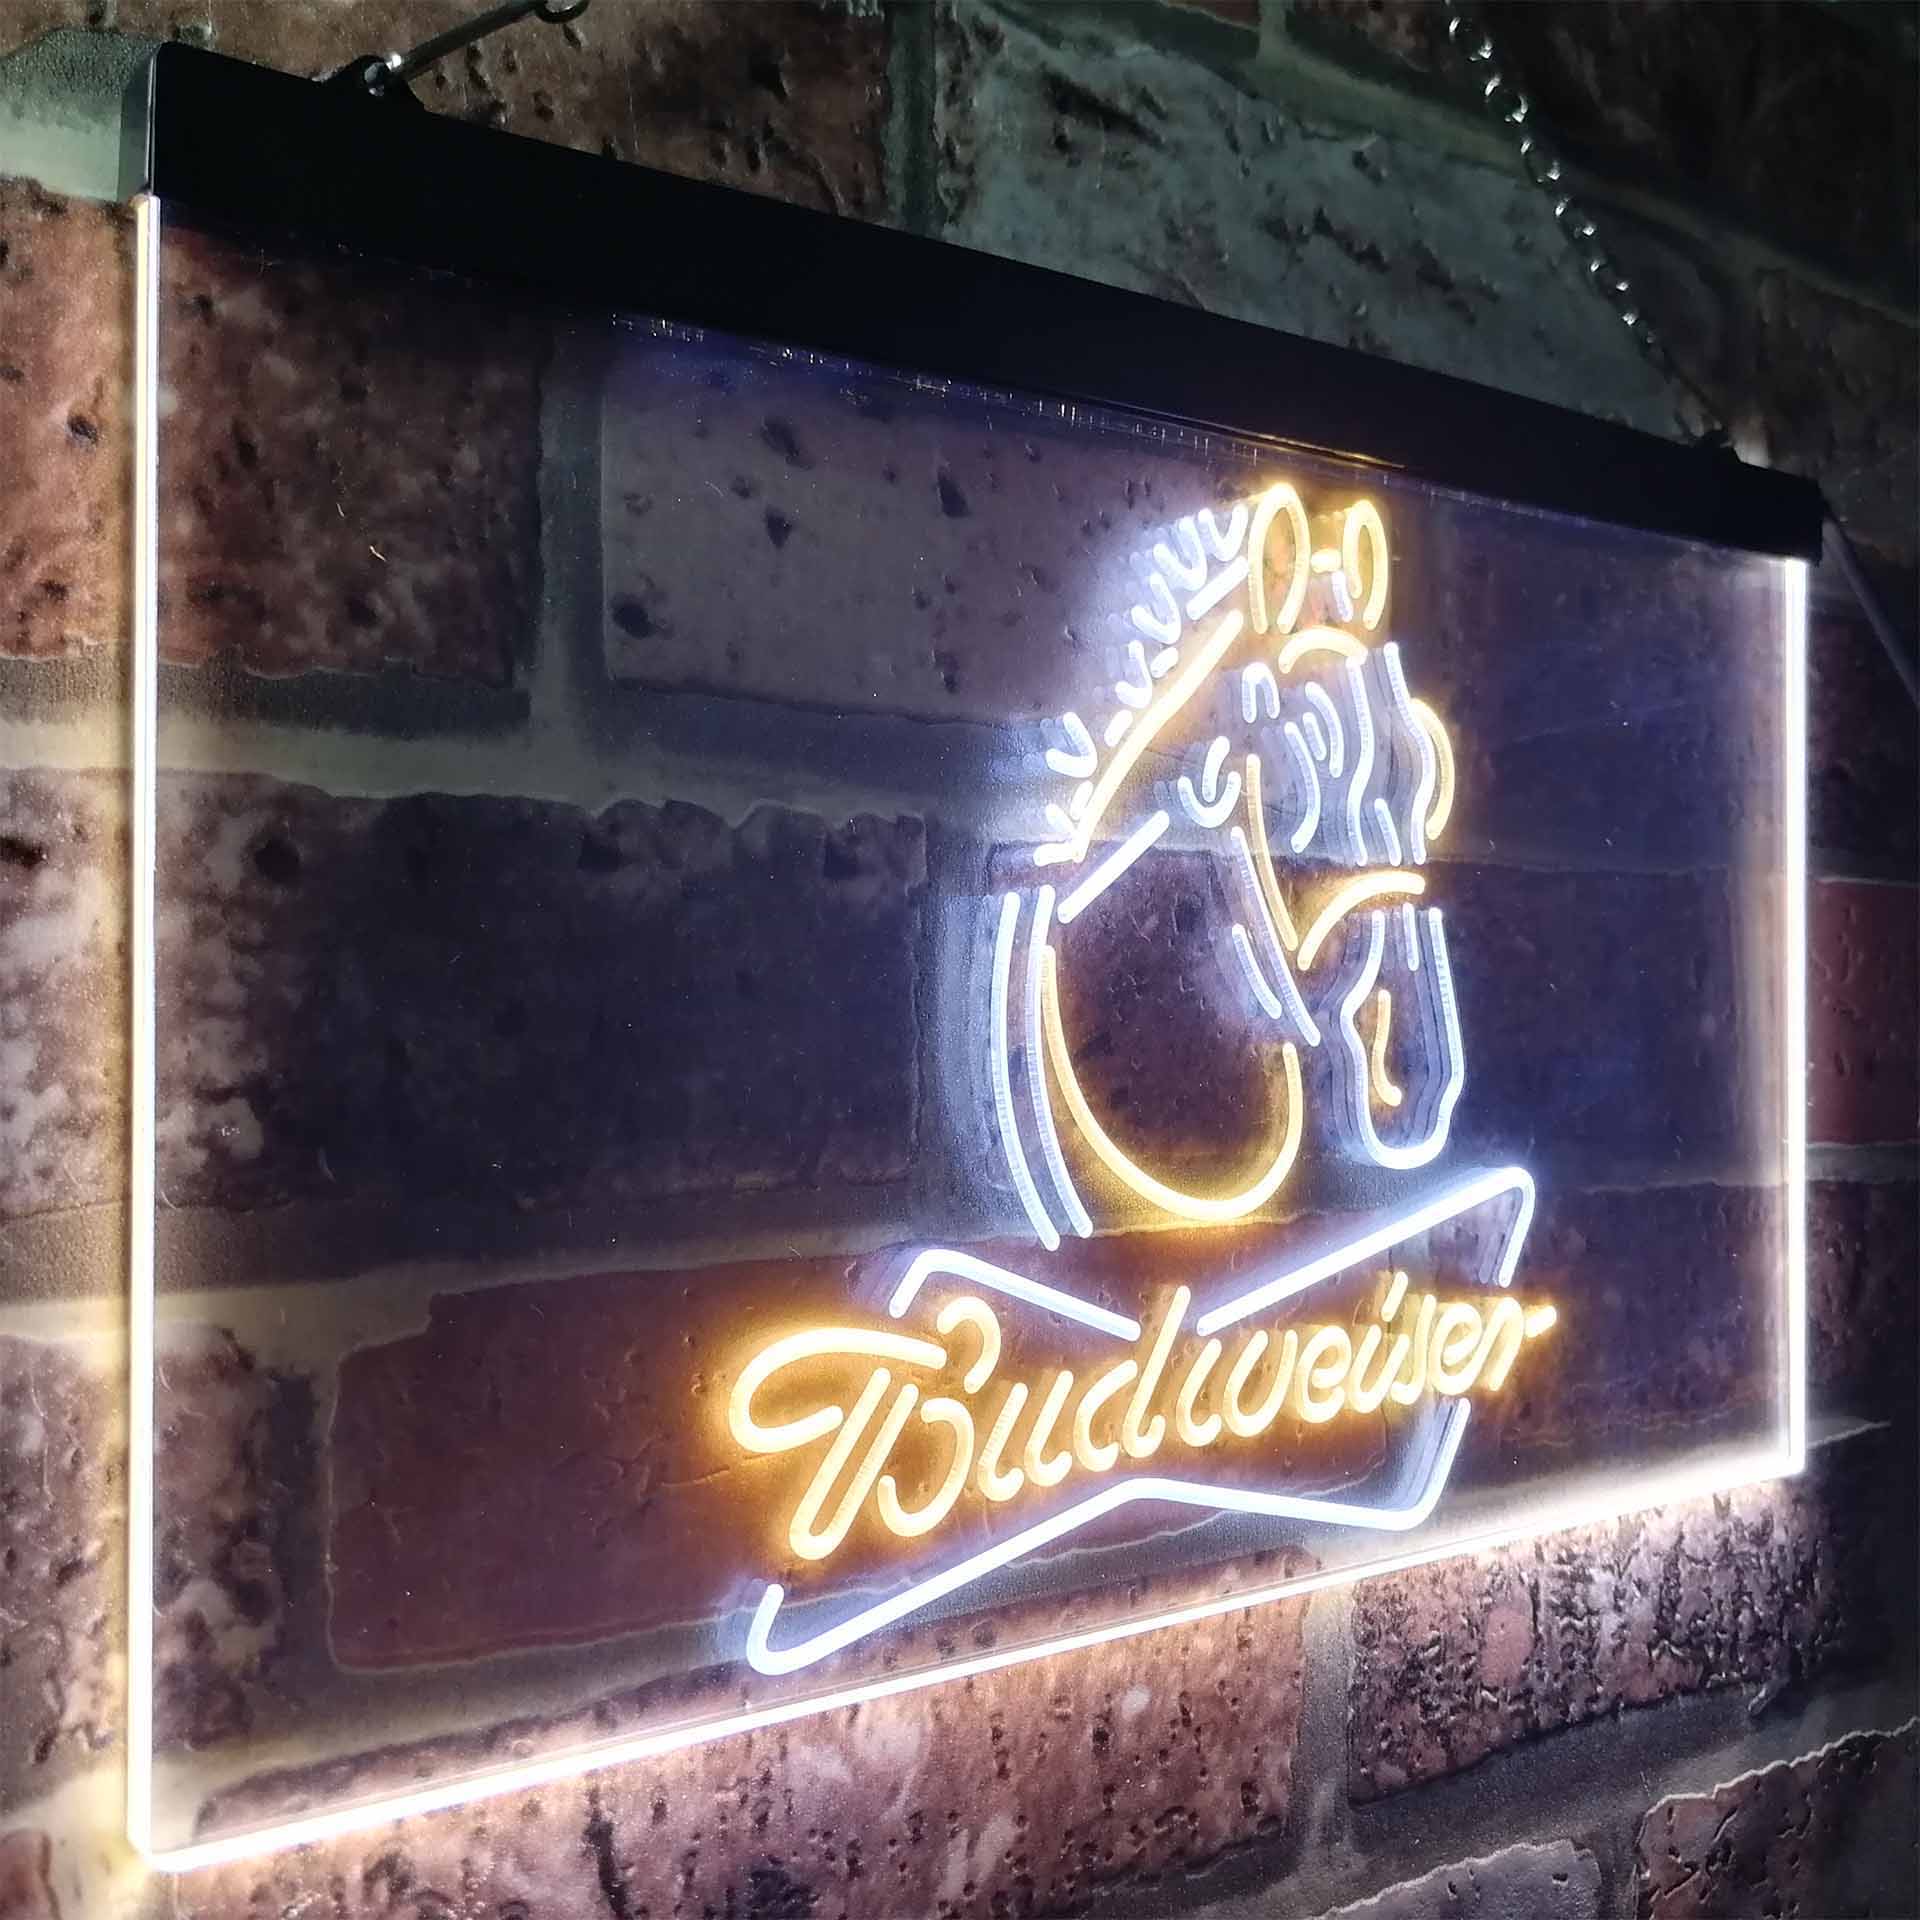 Budweiser Clydesdale Horse Head LED Neon Sign